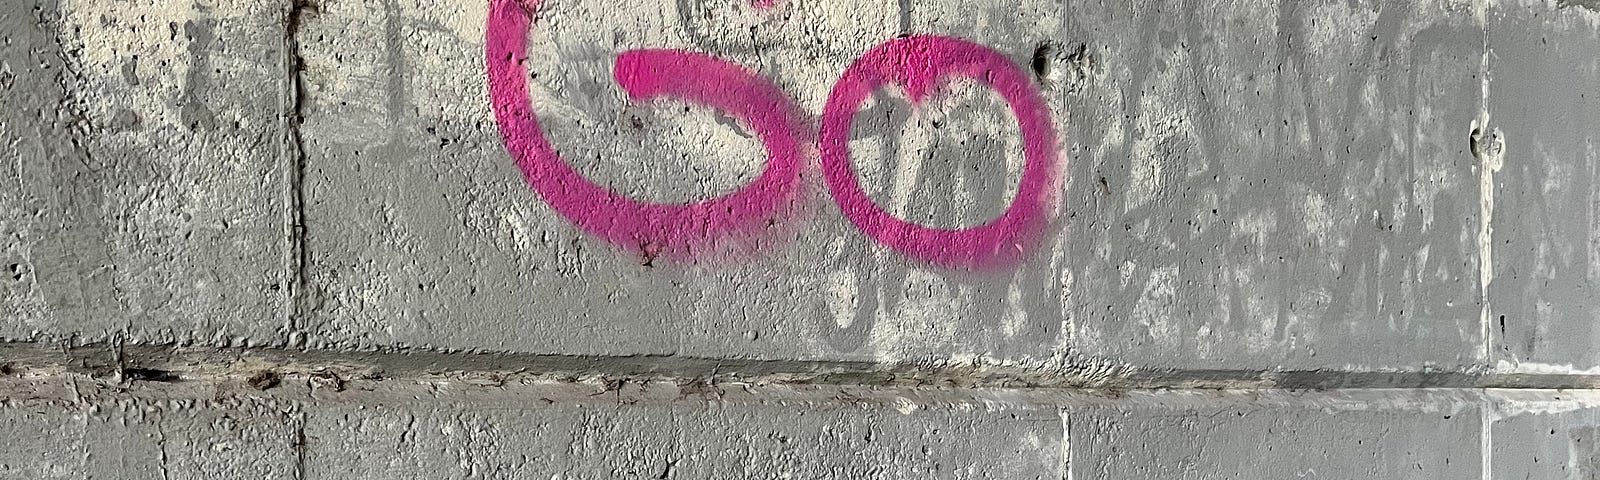 A concrete wall with the words “Go Vegan” spray painted on in pink.